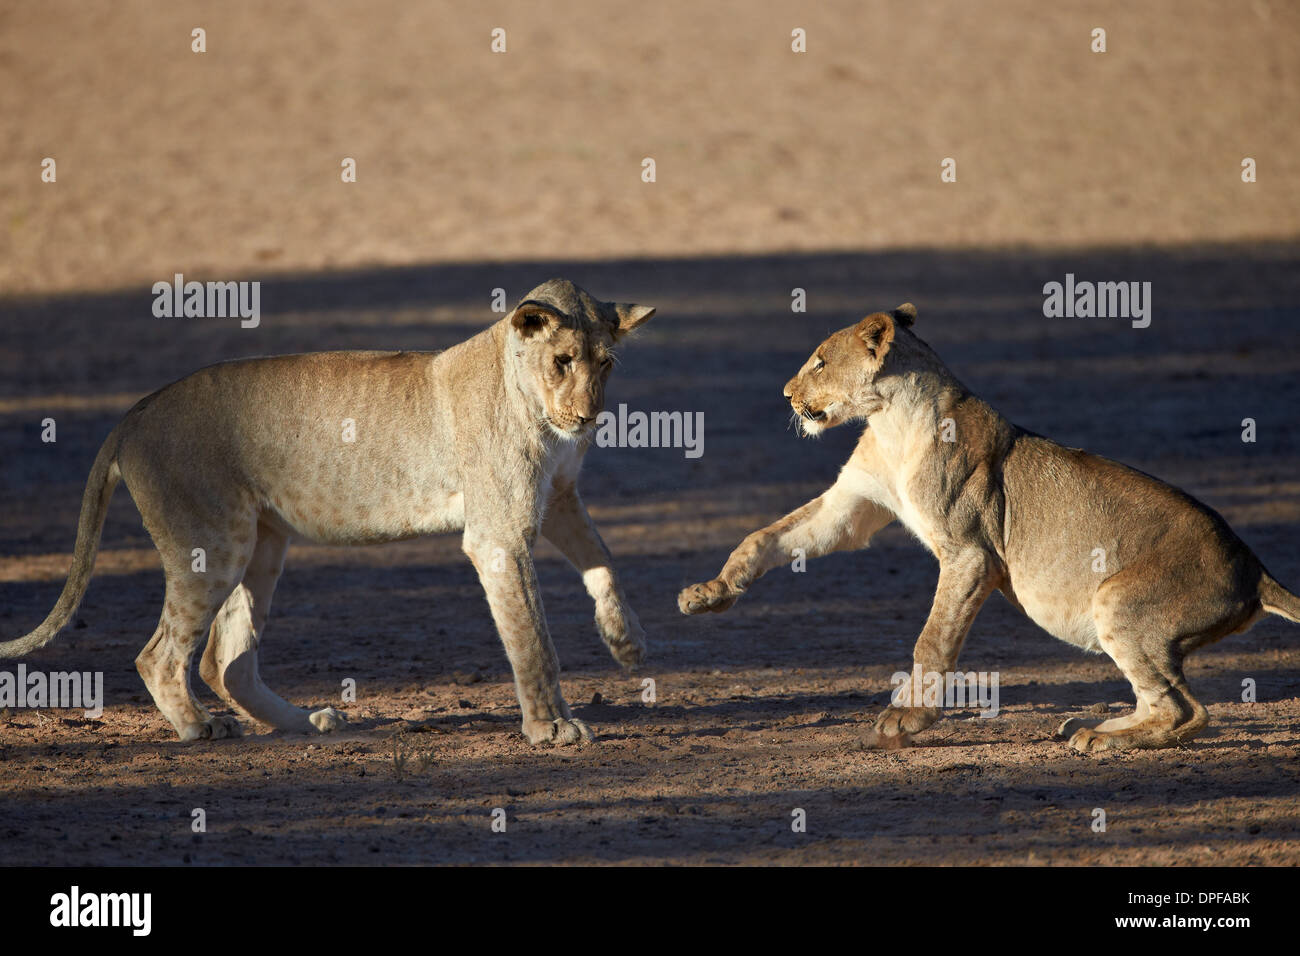 Two young lion (Panthera leo) playing, Kgalagadi Transfrontier Park, South Africa Stock Photo